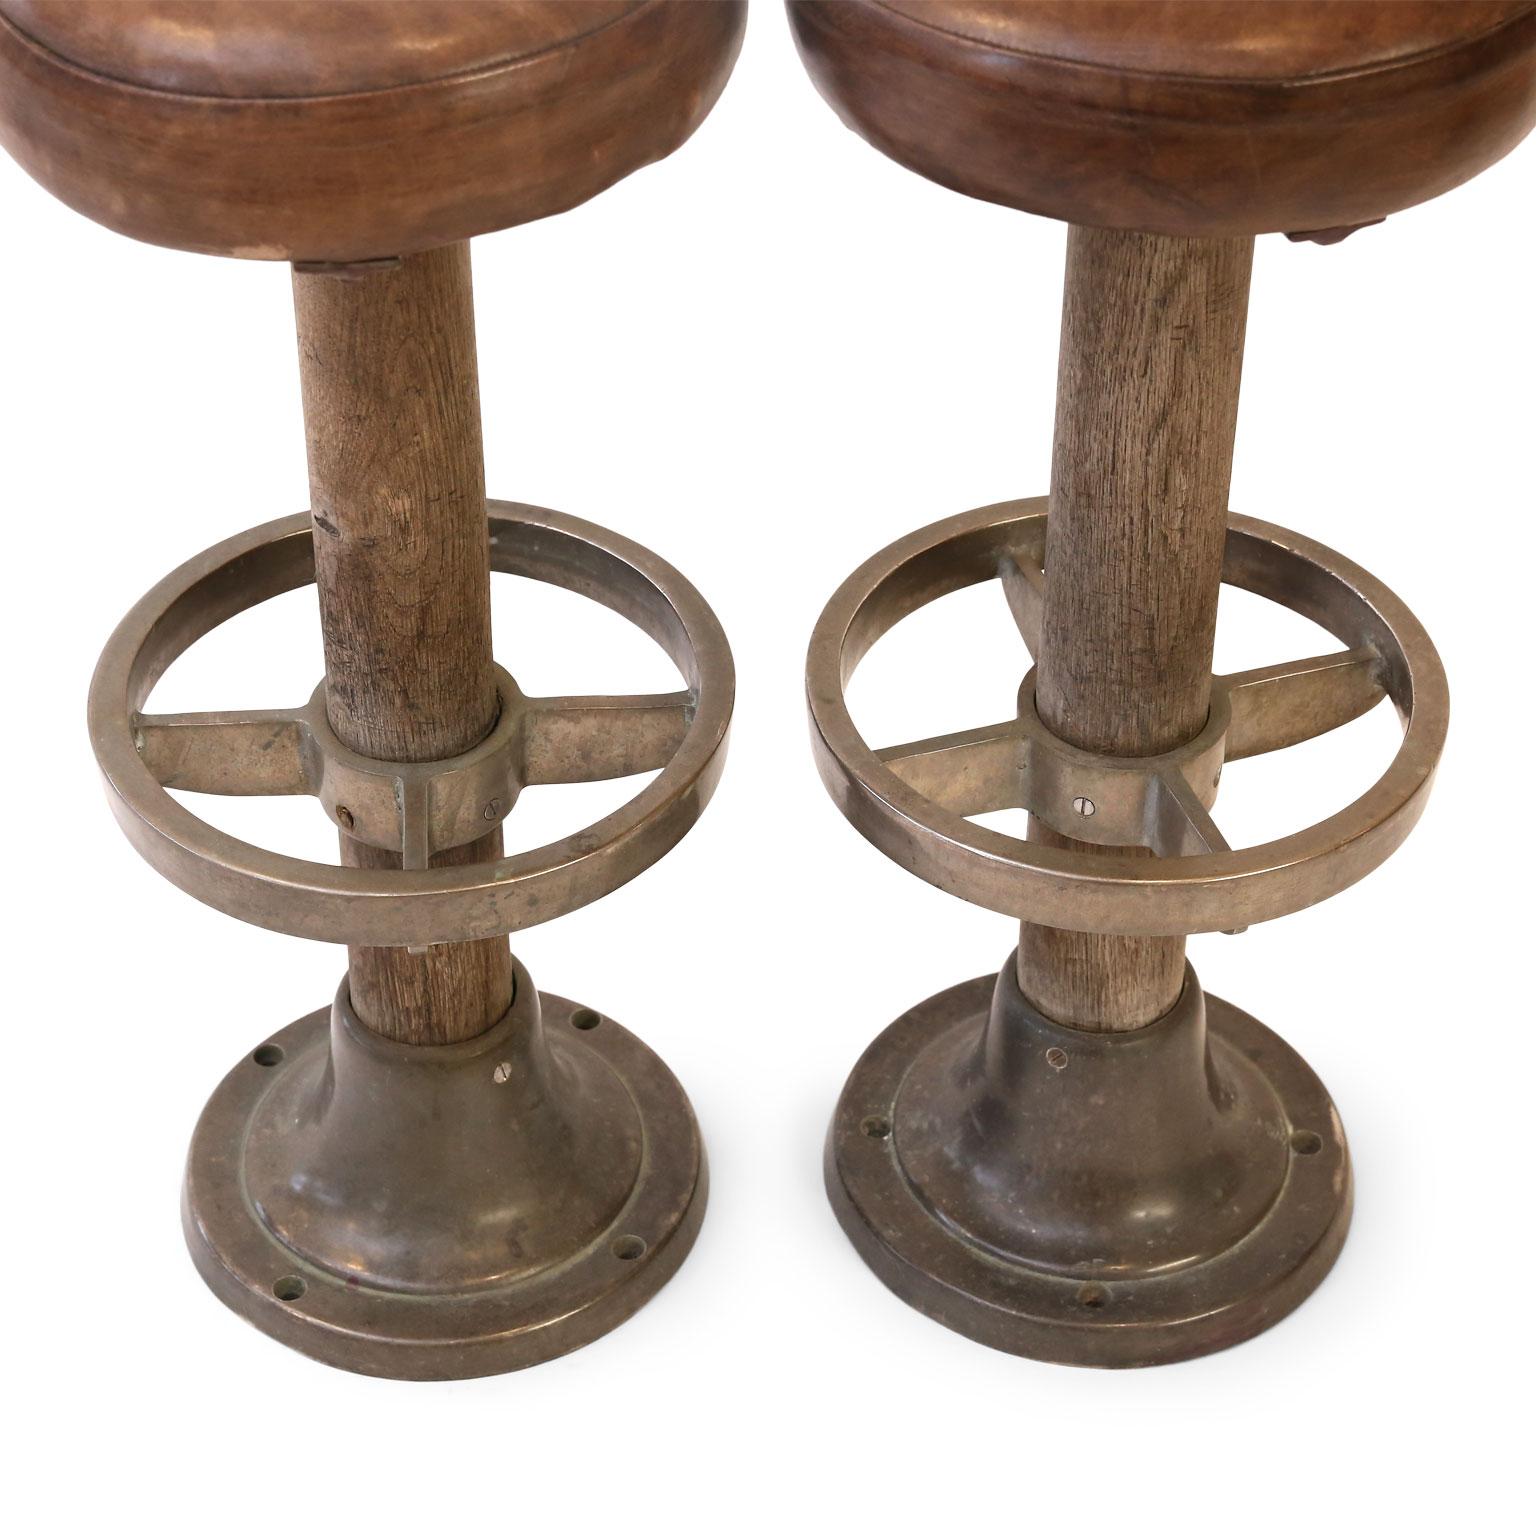 Edwardian Pair of Leather-Covered Barstools